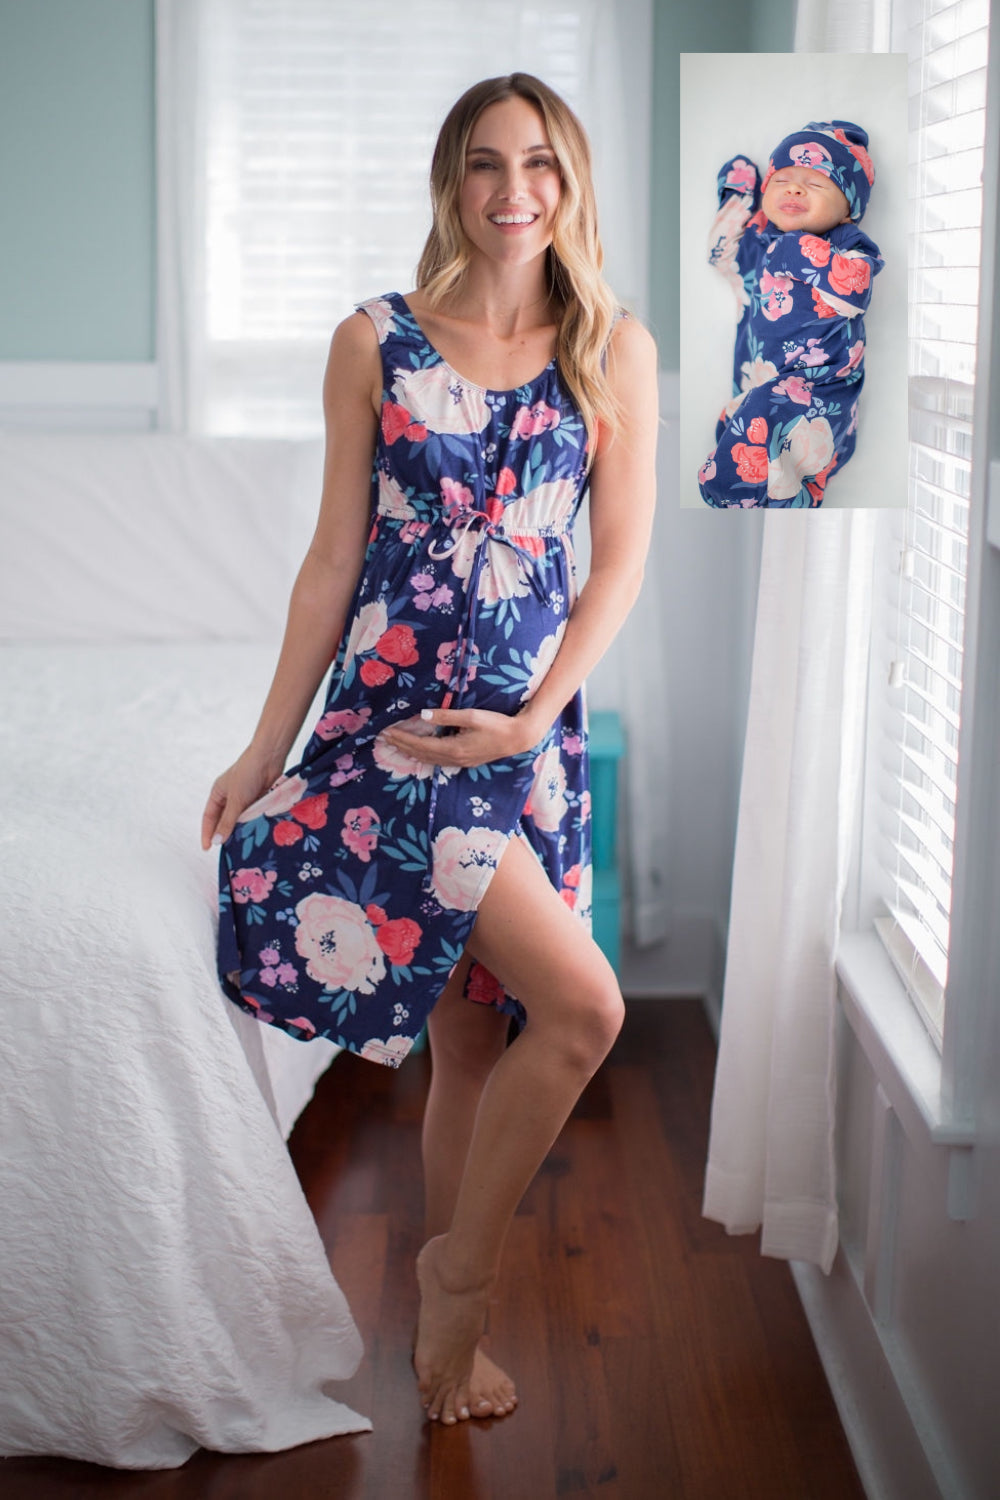 Annabelle print labor gown with cream and pink flowers against a navy background. This set comes with matching baby gown. 